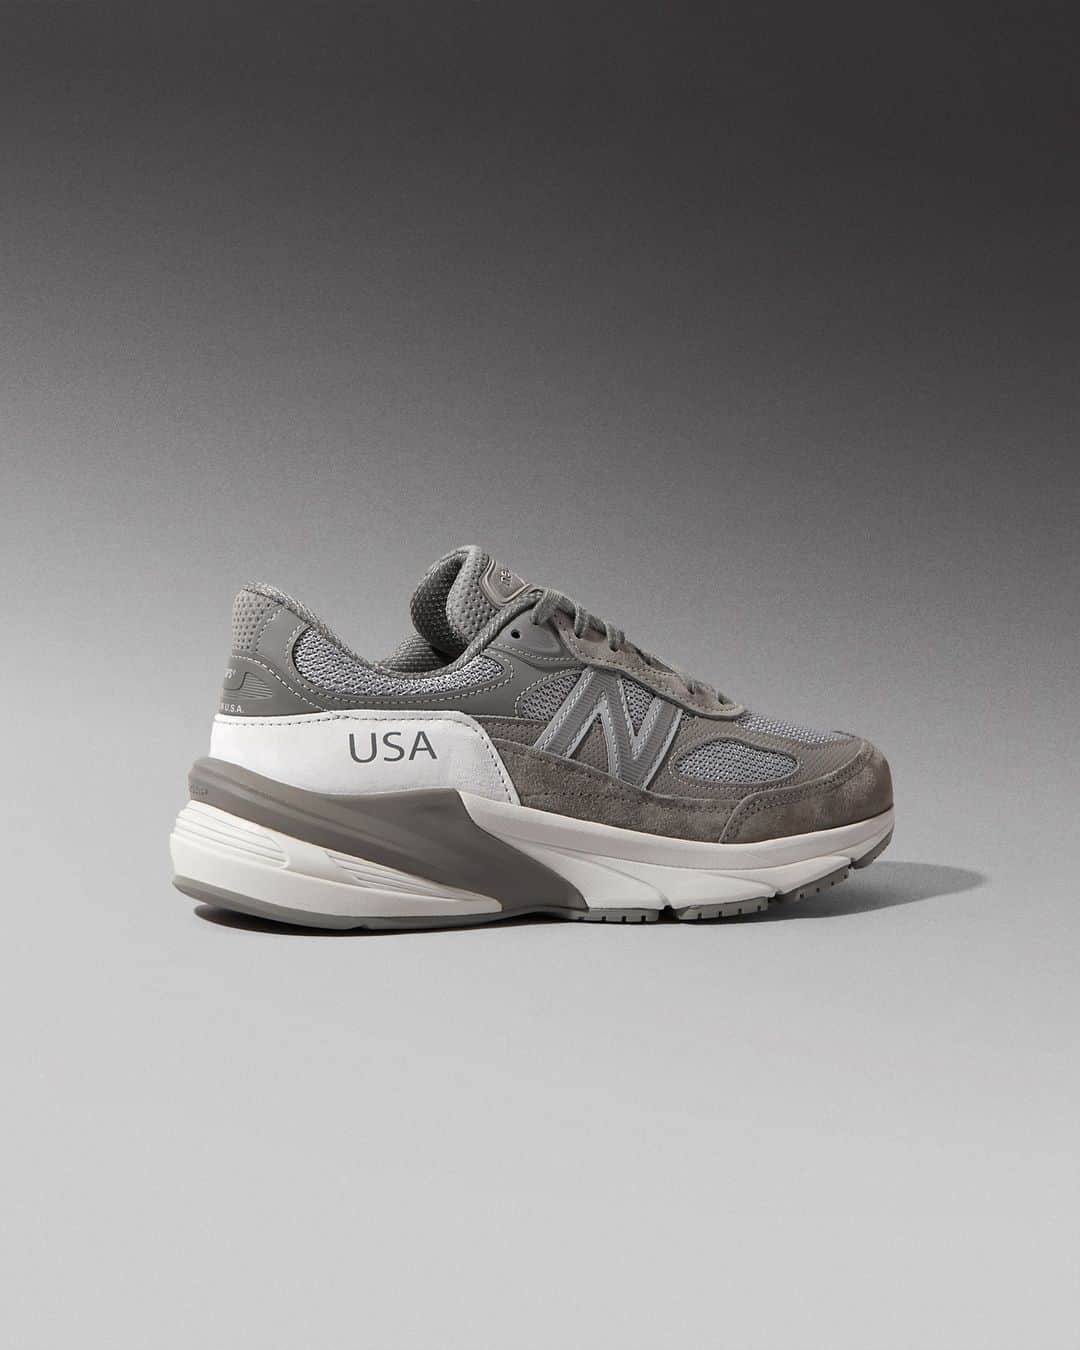 Flight Clubのインスタグラム：「Japan and USA connect on the WTAPS x 990v6 'Moon Mist.' A stealthy blend of greyscale mesh and suede enshrouds the lightweight runner. 'Made in USA' hits appear in oversized letters. The global collab is signed-off with minimal WTAPS branding positioned neatly on the back heel.」